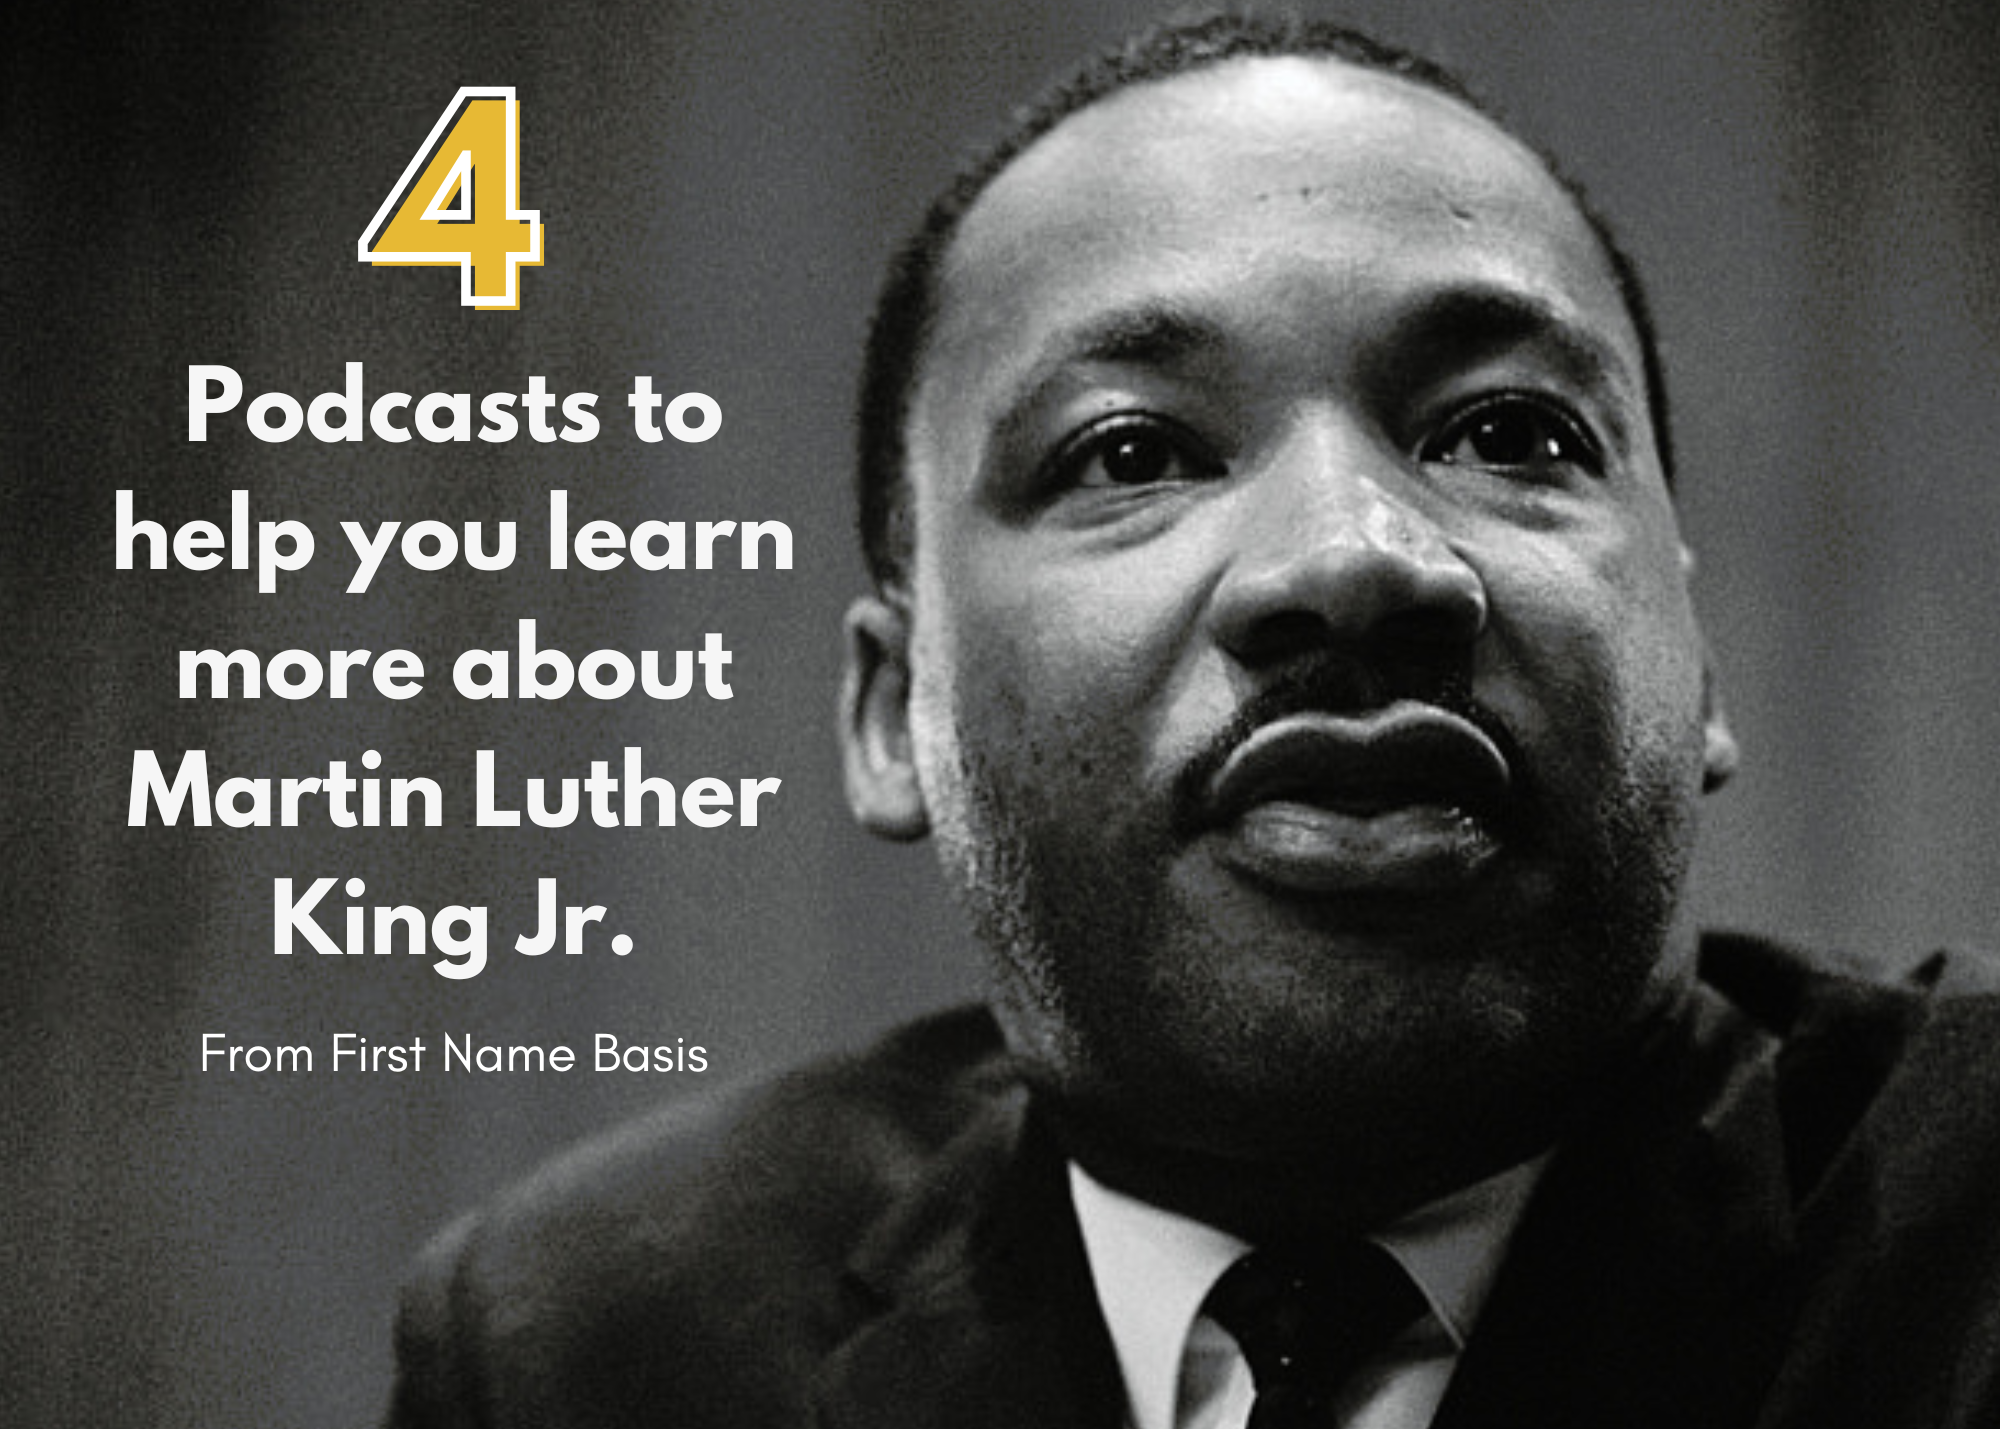 4 Podcasts to Hep You Learn More About Martin Luther King Jr.